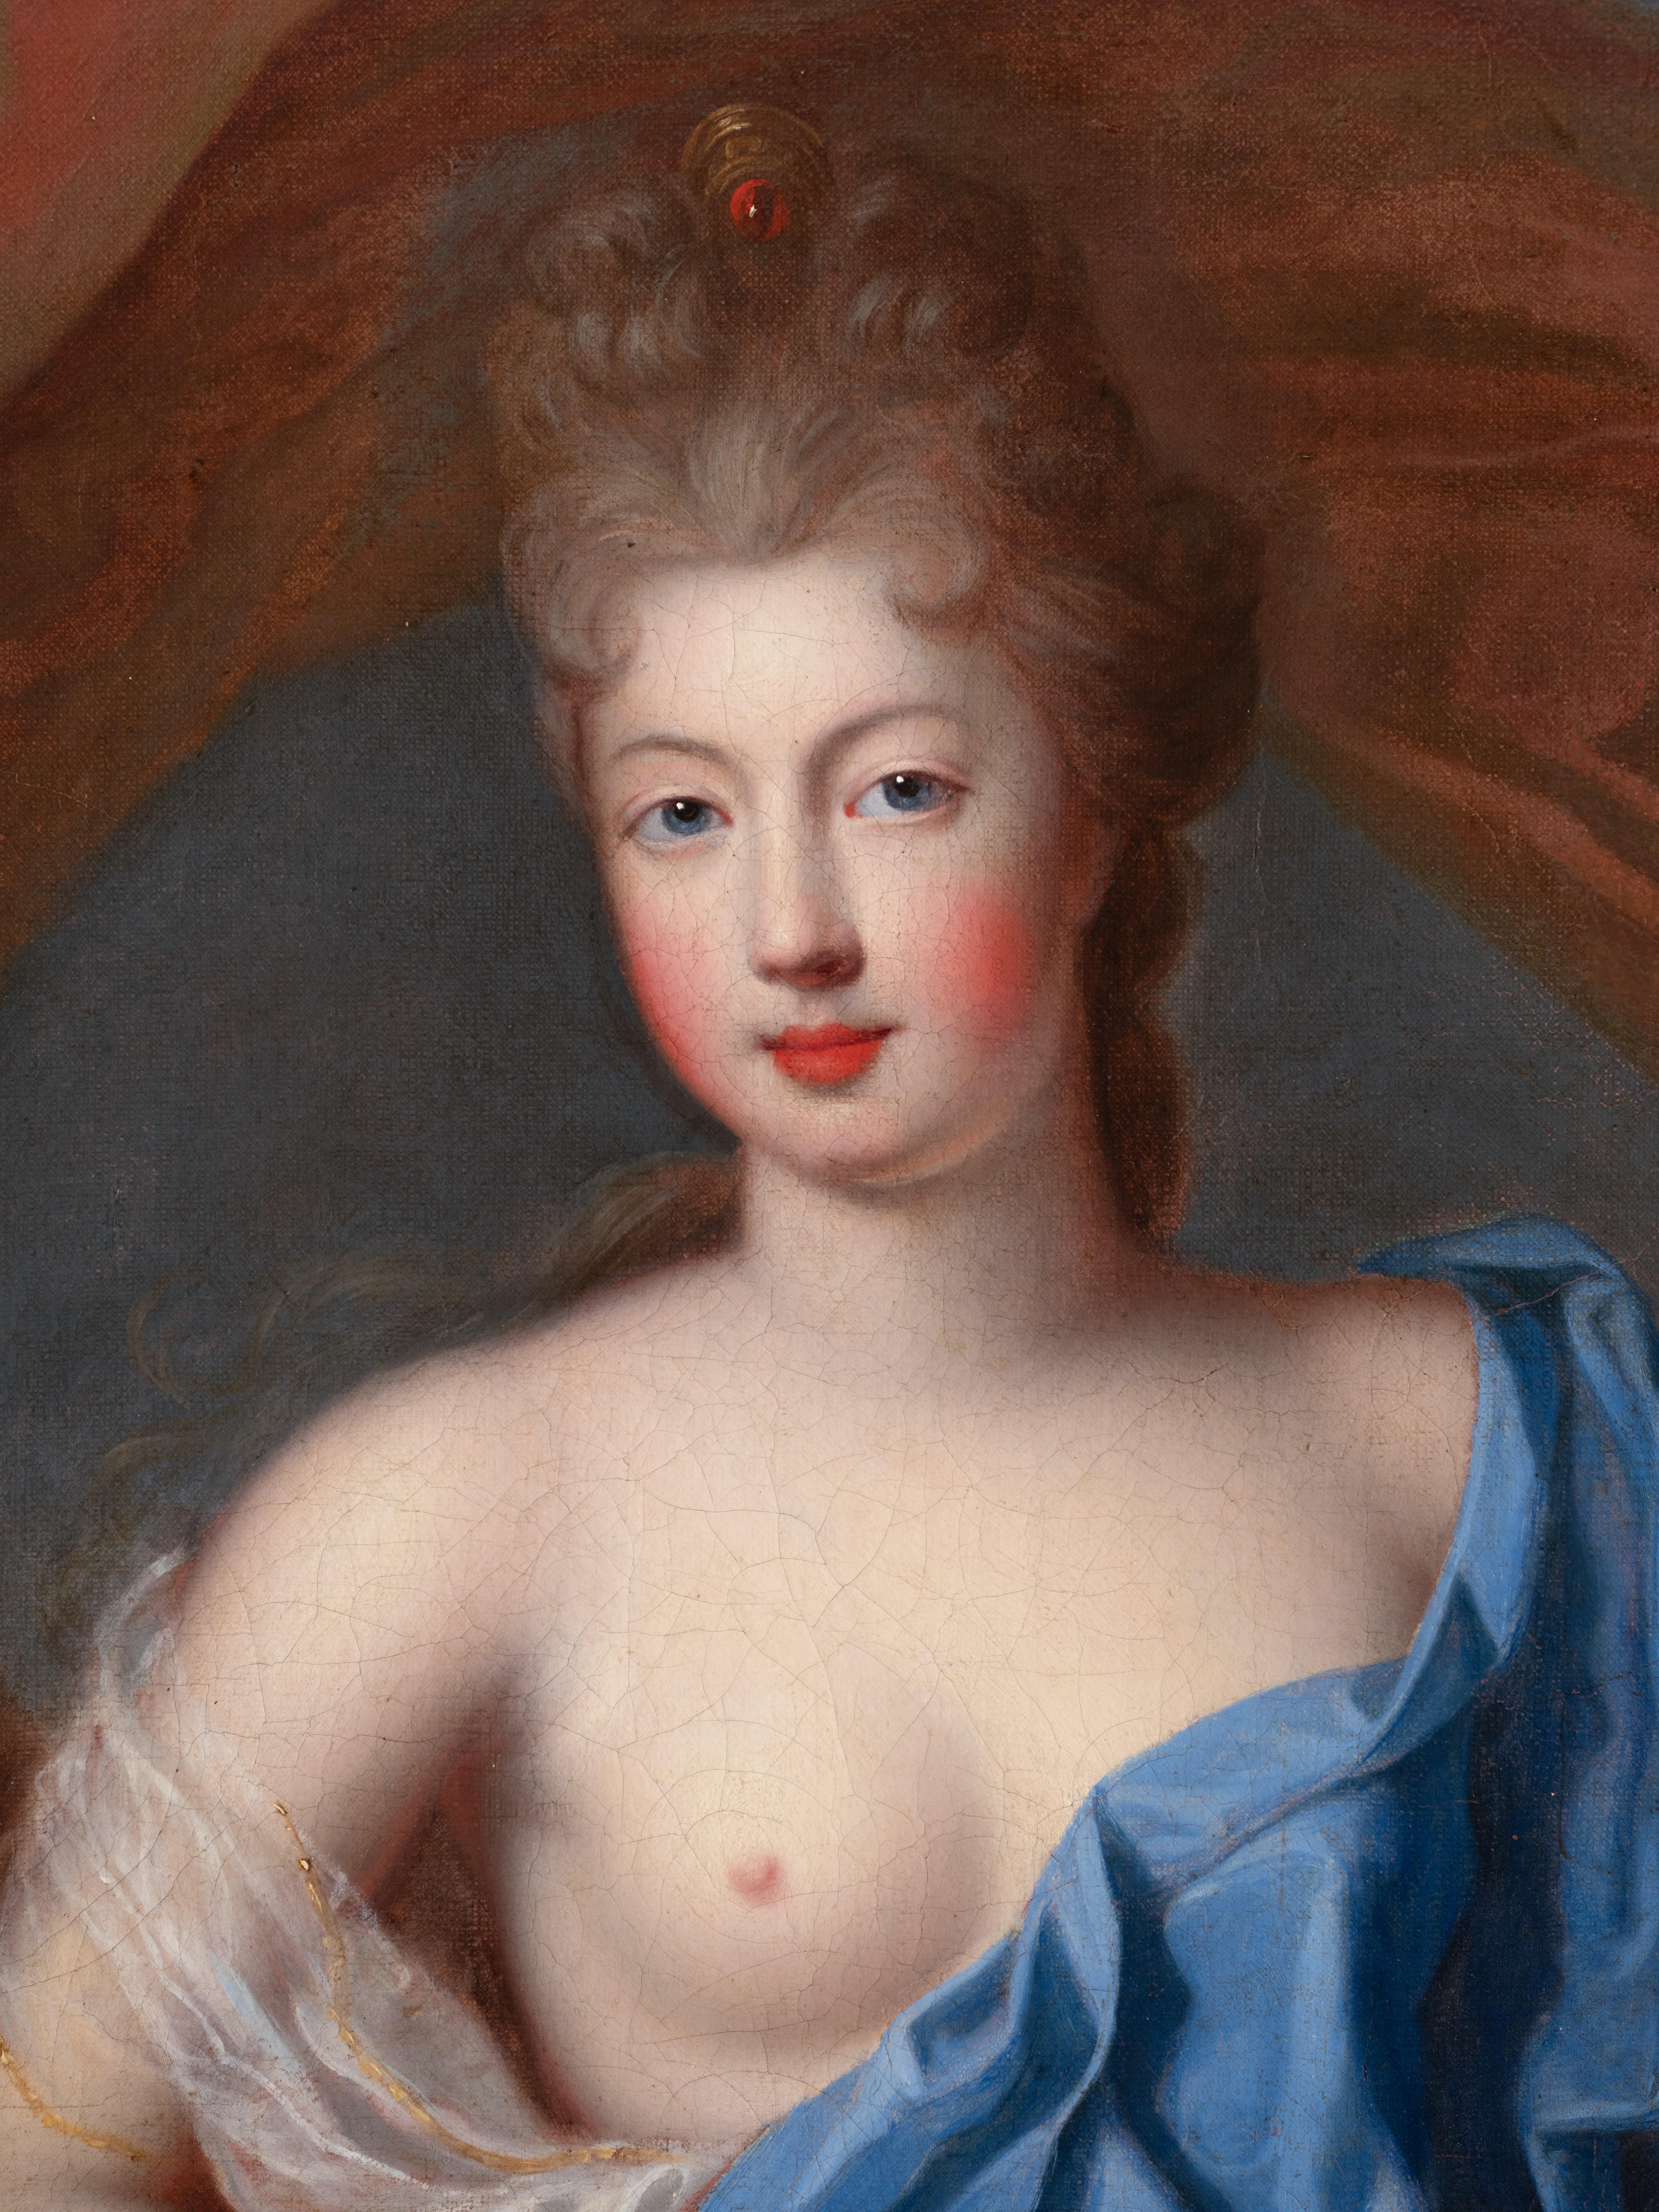 Late 17th century portrait of a French princess, daughter of Louis XIV For Sale 1